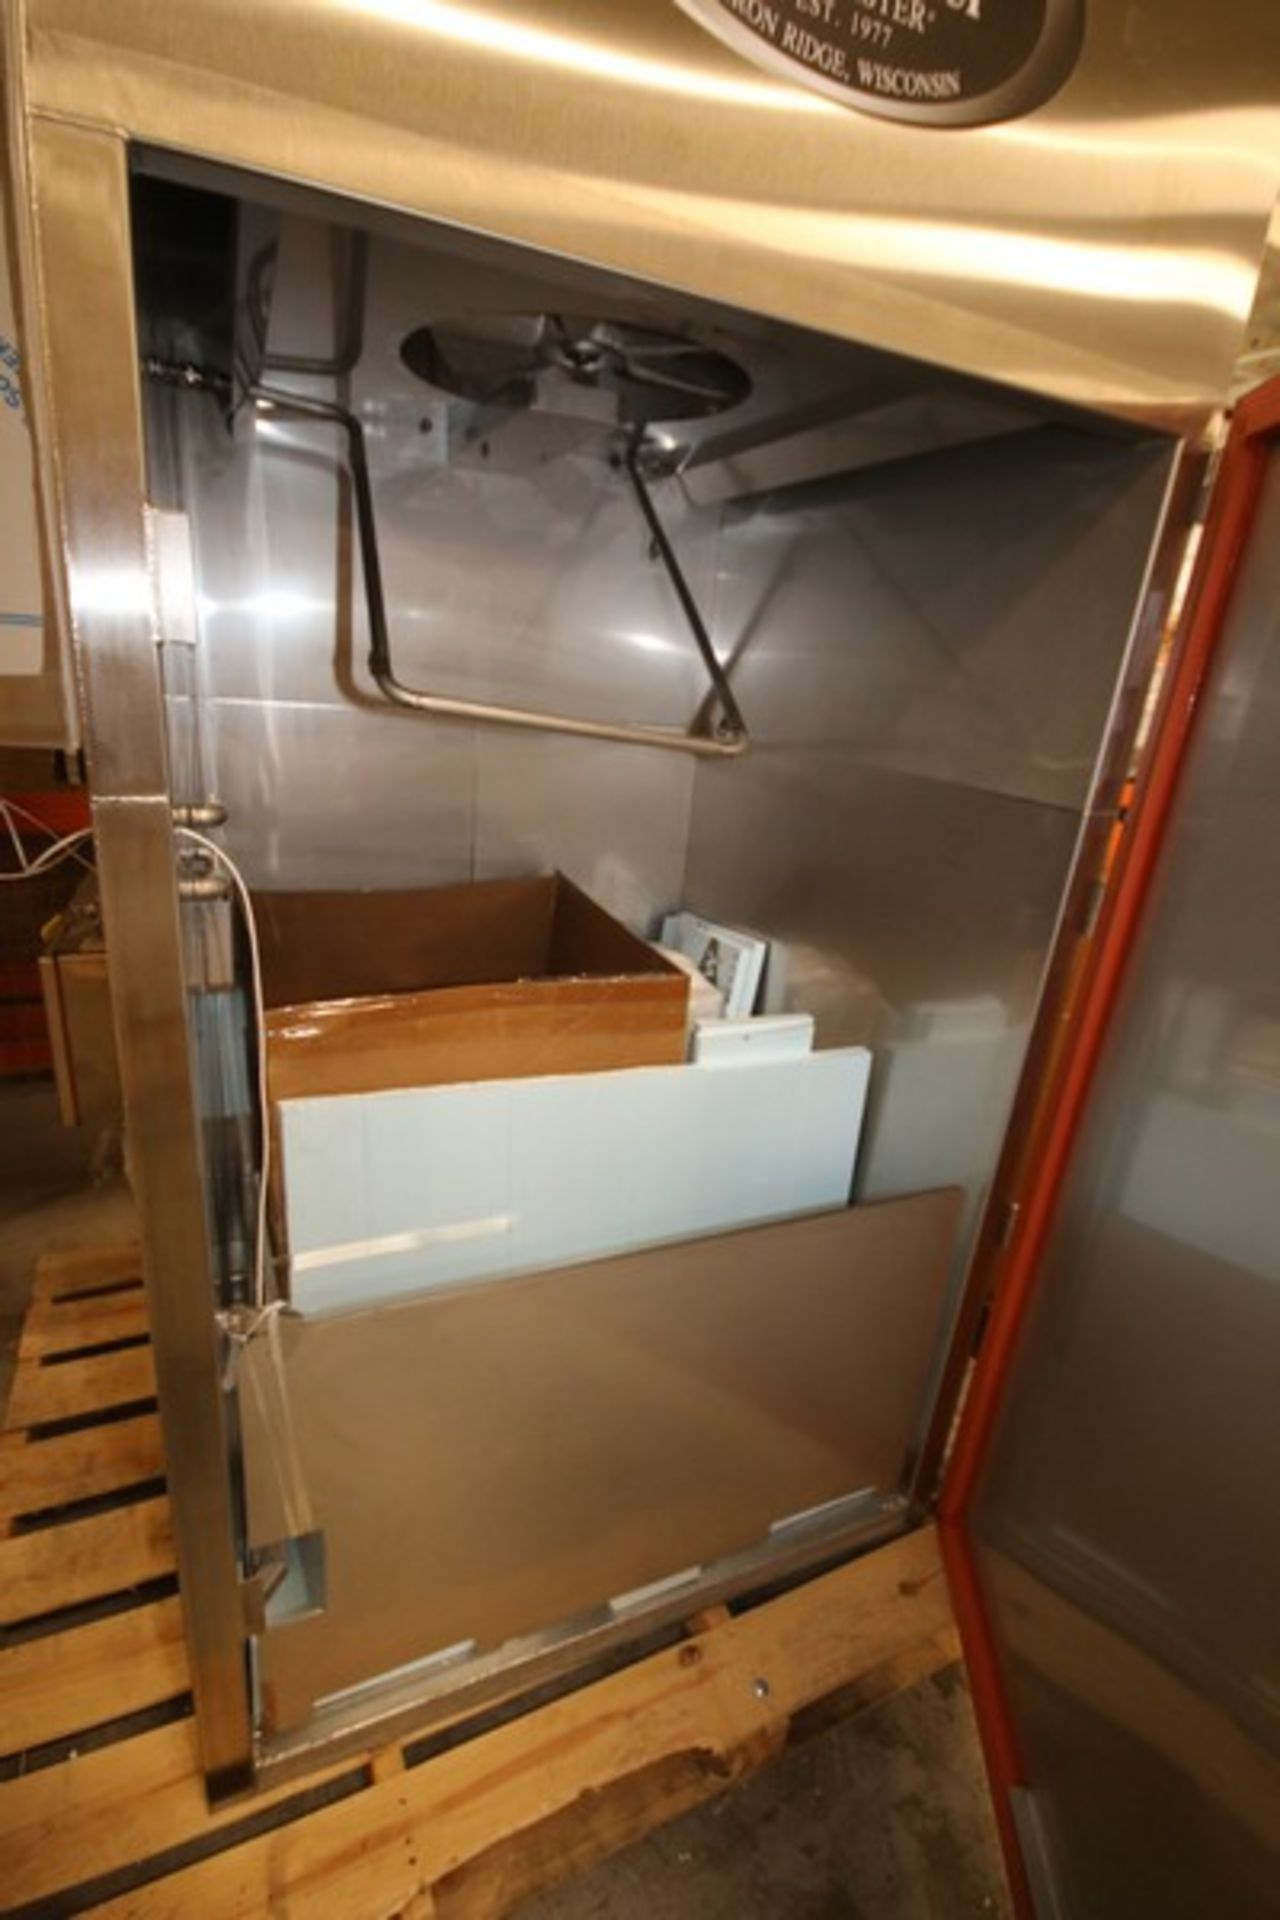 New 2019 Pro Smoker N’ Roaster, Model 500T, SN PSW 006475, Inside Dimensions 40" D x 62" H x 40" - Image 2 of 8